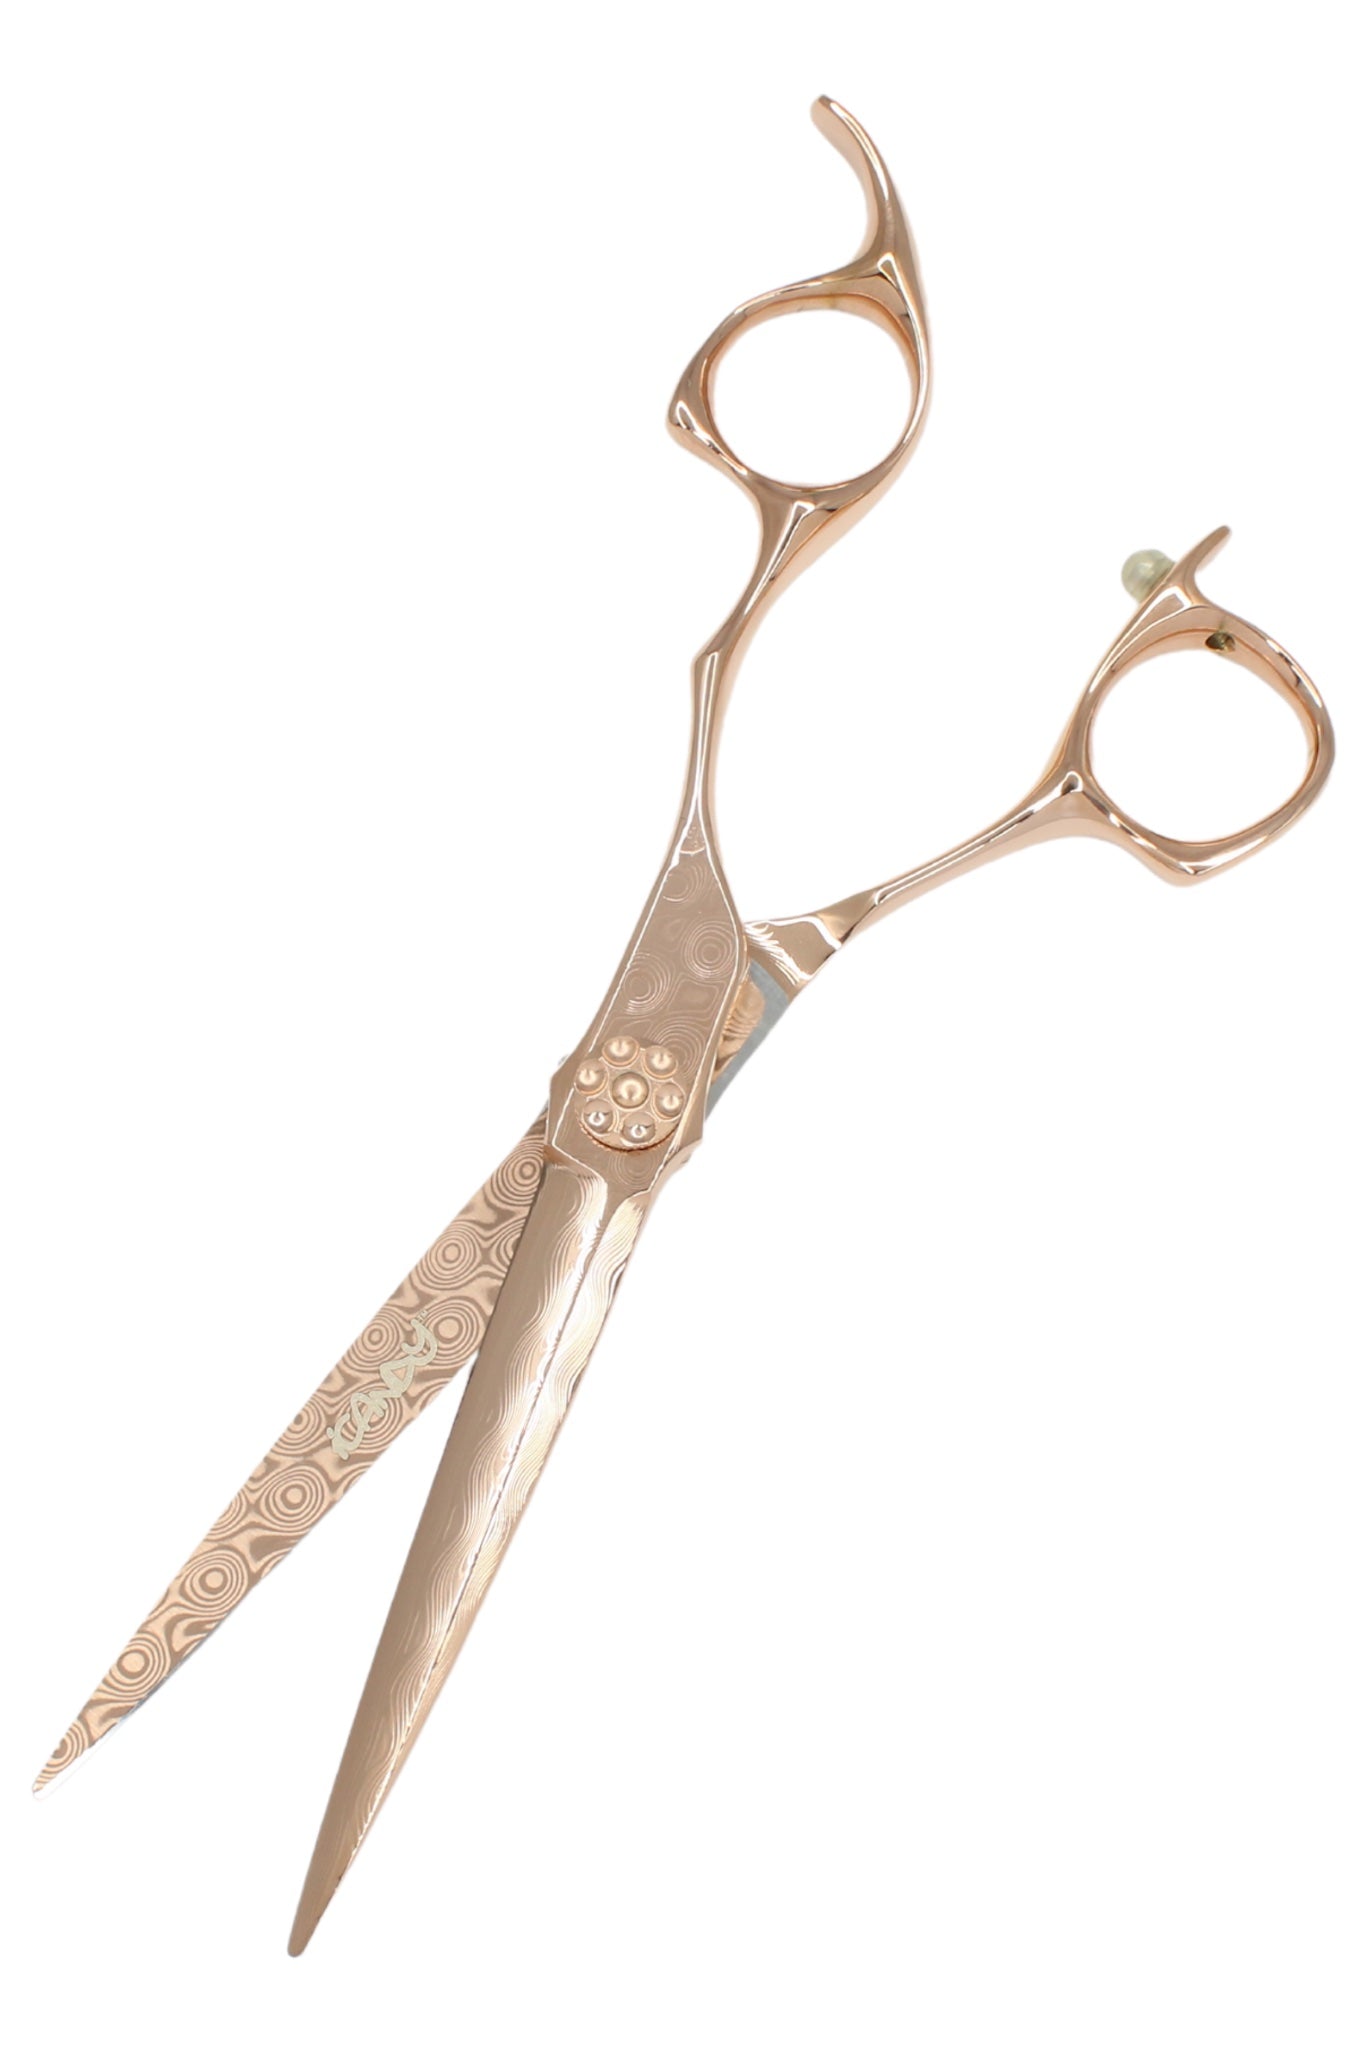 iCandy DAMASCUS ALL STAR Rose Gold Scissor 6.5" Pic3